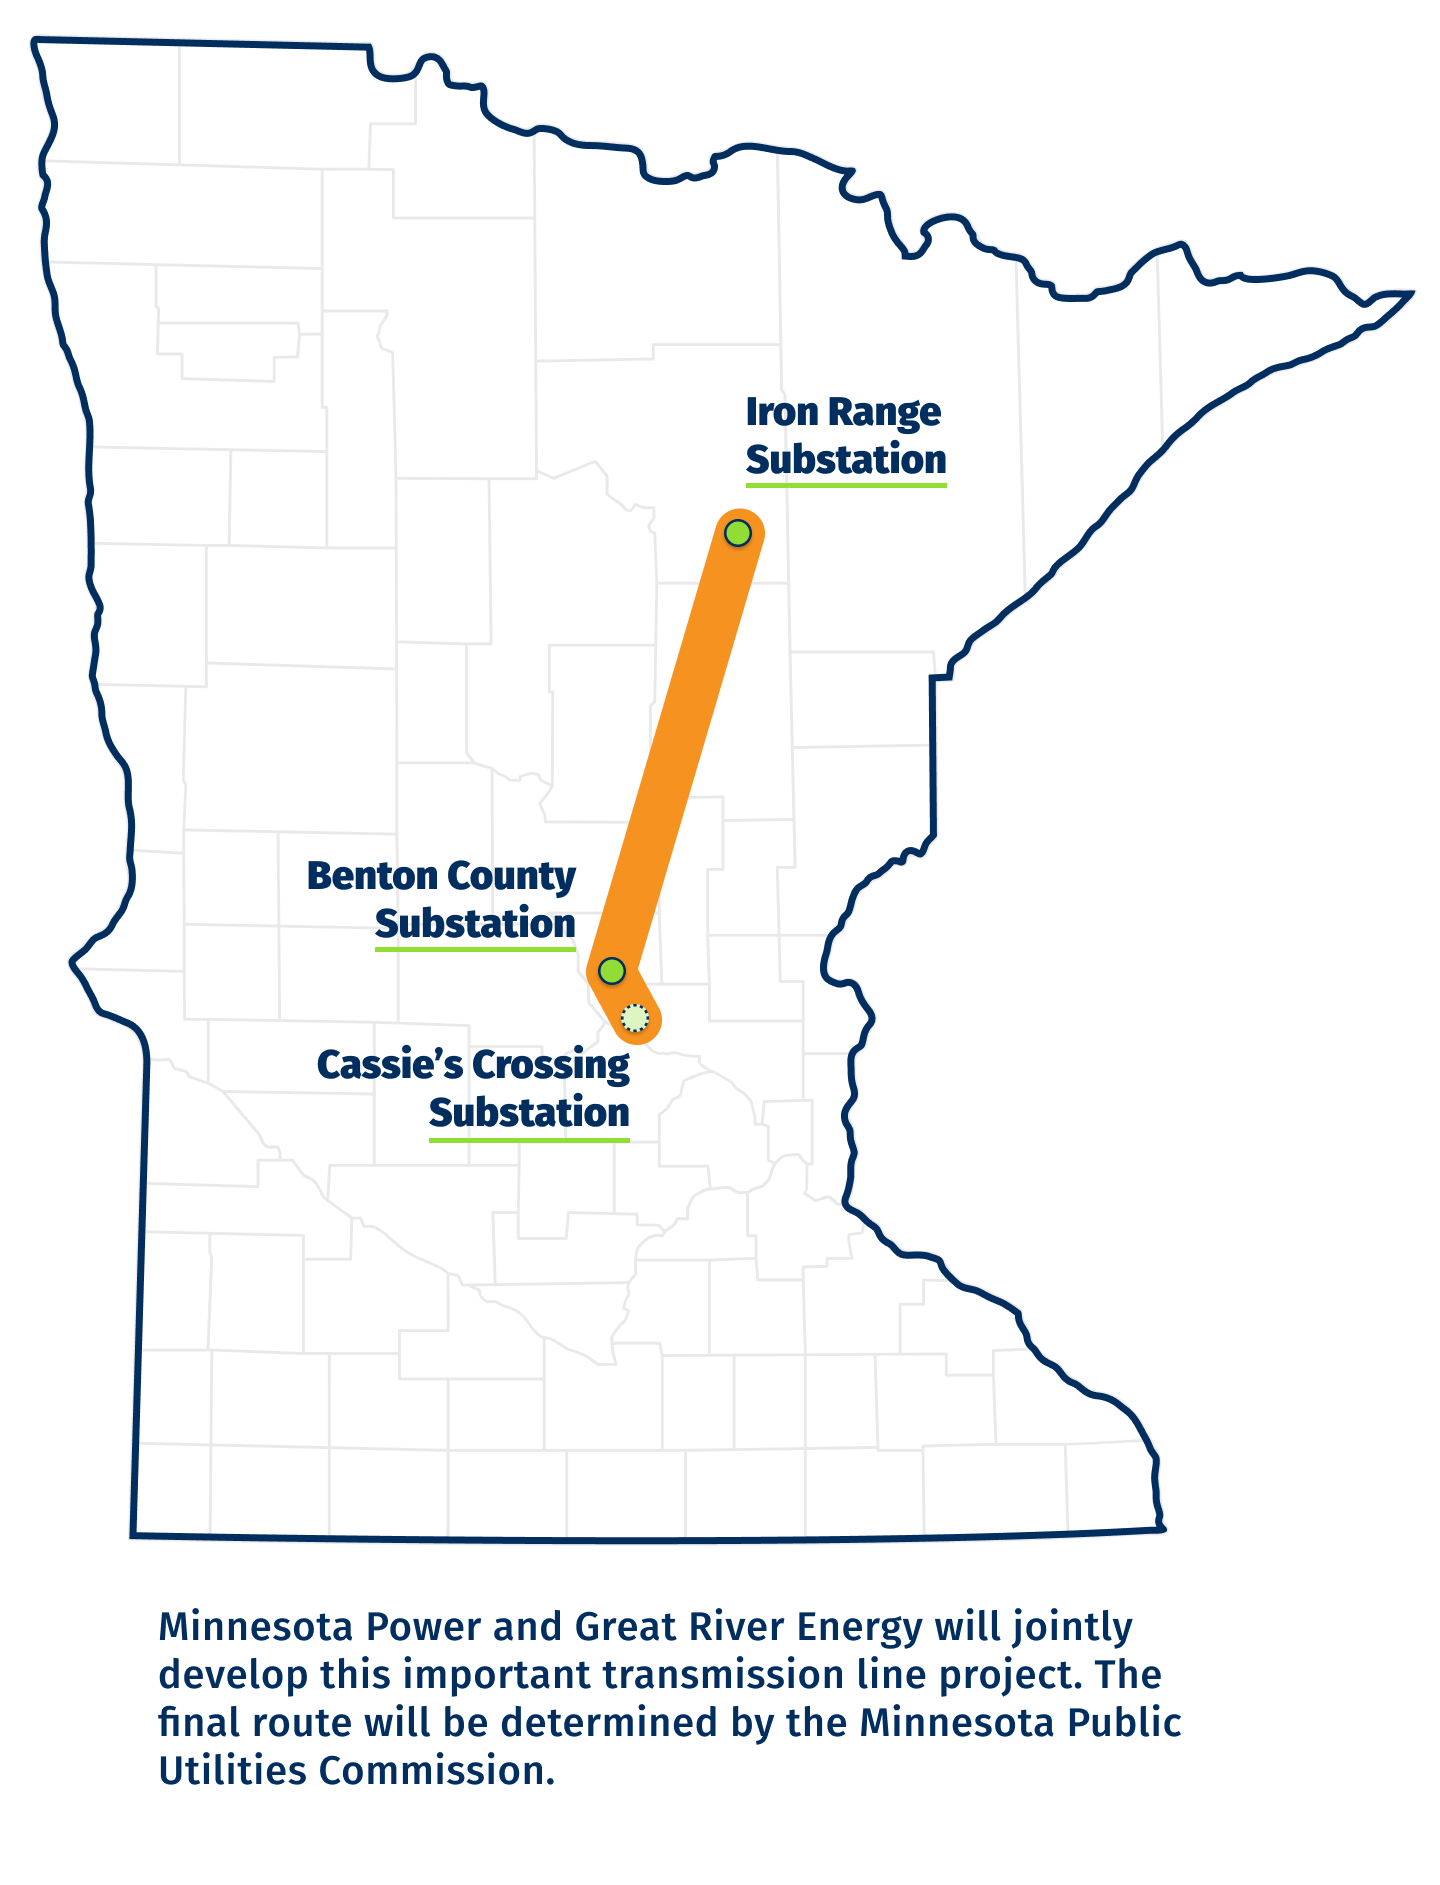 minnesota-power-and-great-river-energy-to-build-transmission-line-to